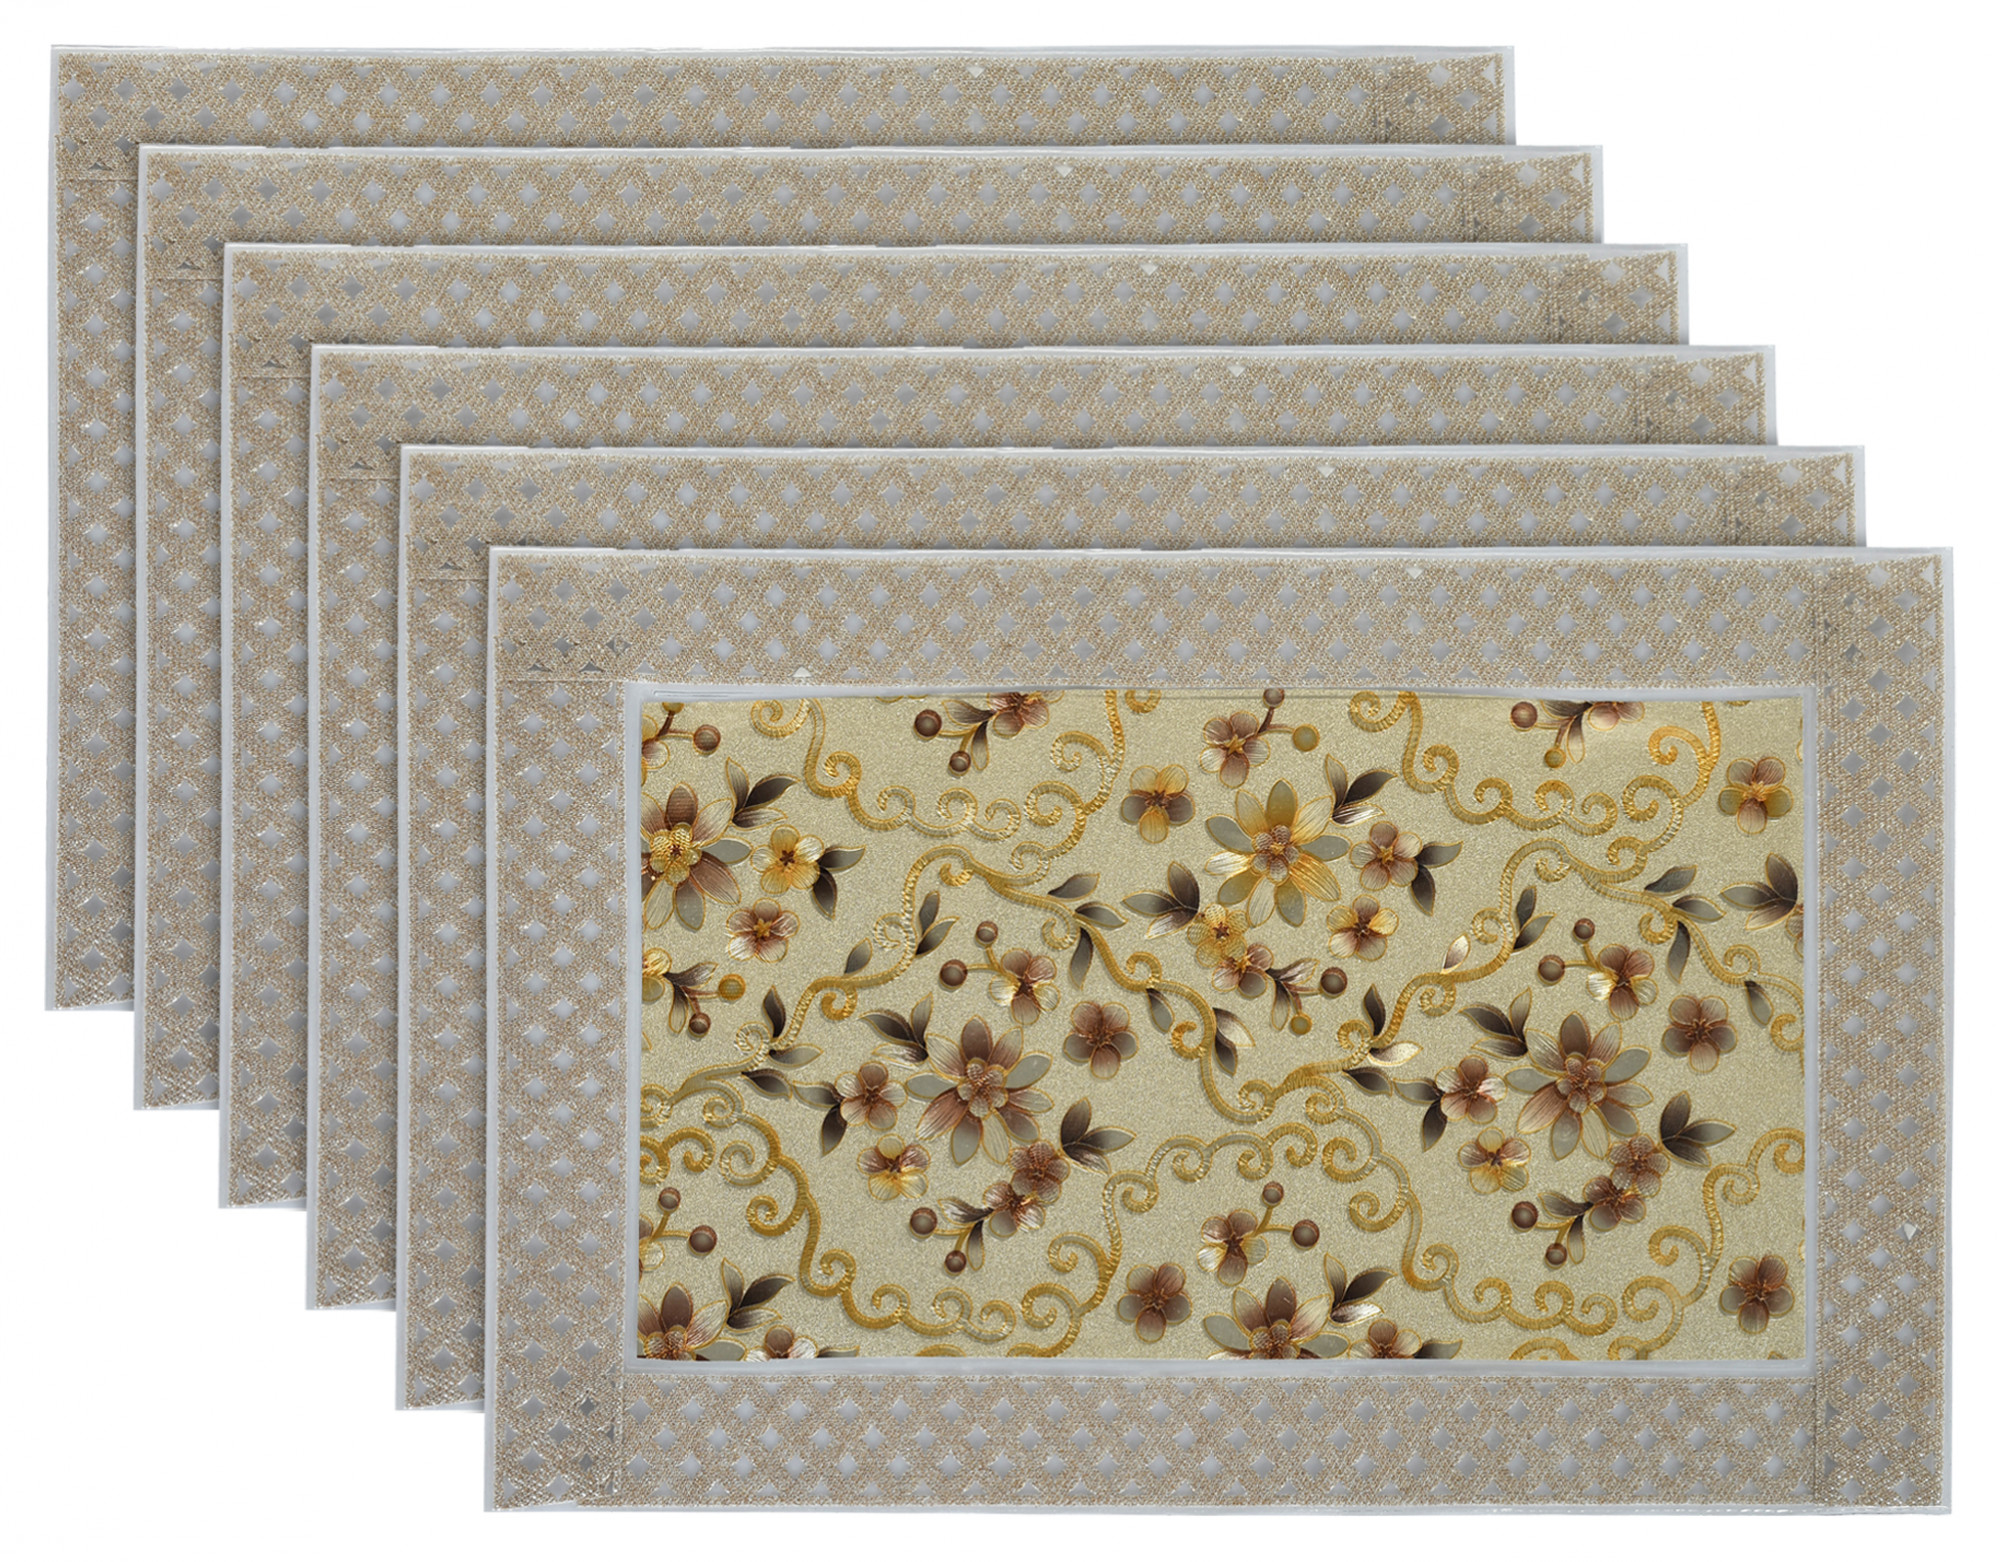 Kuber Industries Flower Design PVC Dining Table Placemat Set, Set of 6 (Gold)